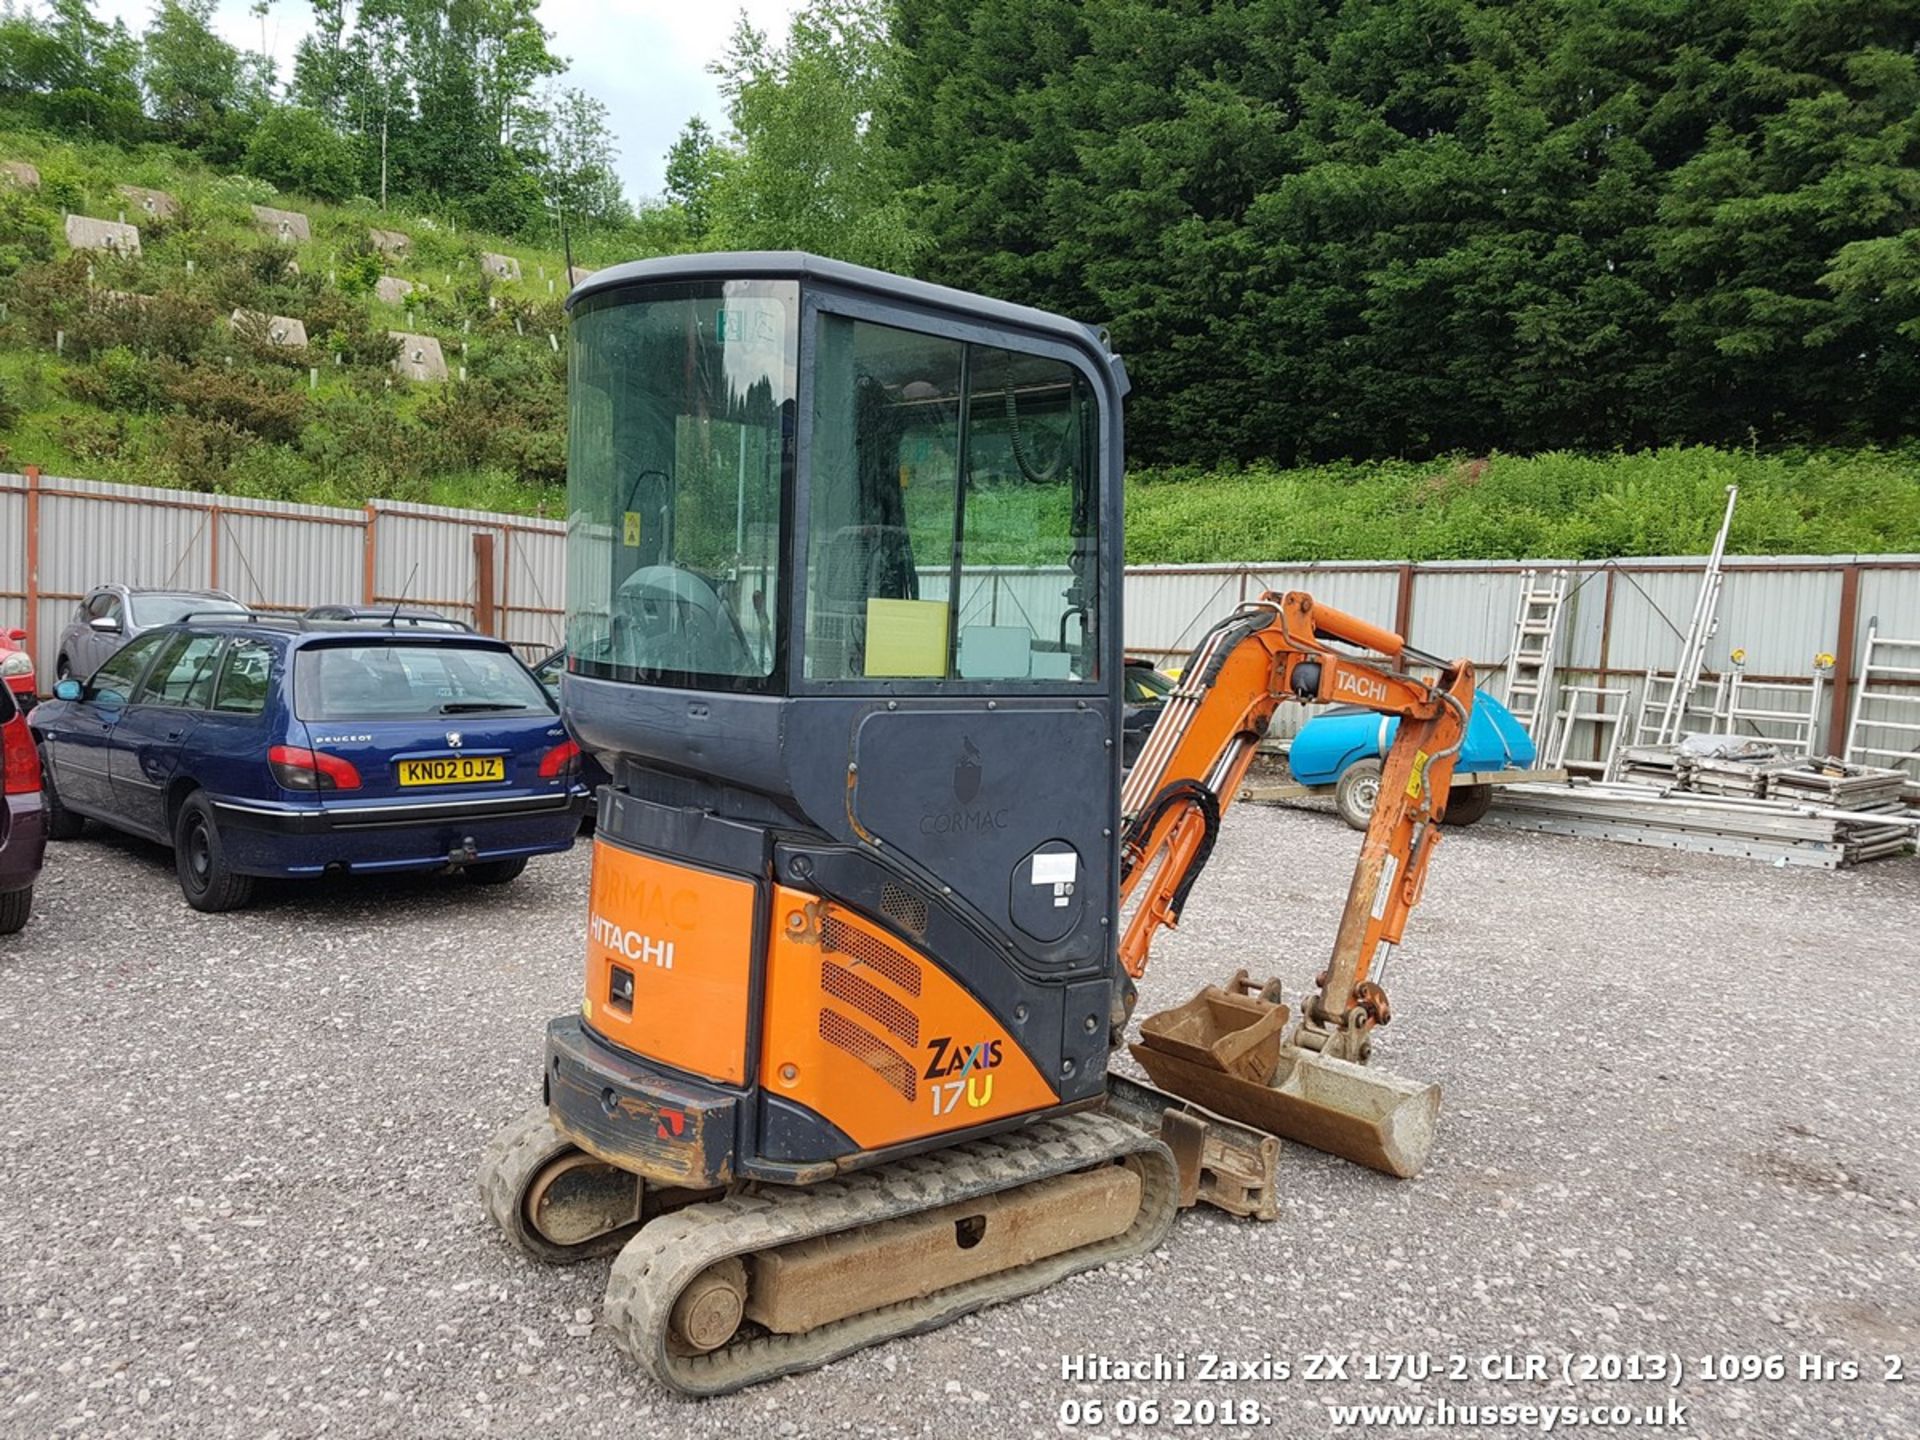 HITACHI ZAXIS 17U DIGGER 2013, 1096 RECORDED HOURS, C/W 2 BUCKETS, PIPED 719013 - Image 3 of 7